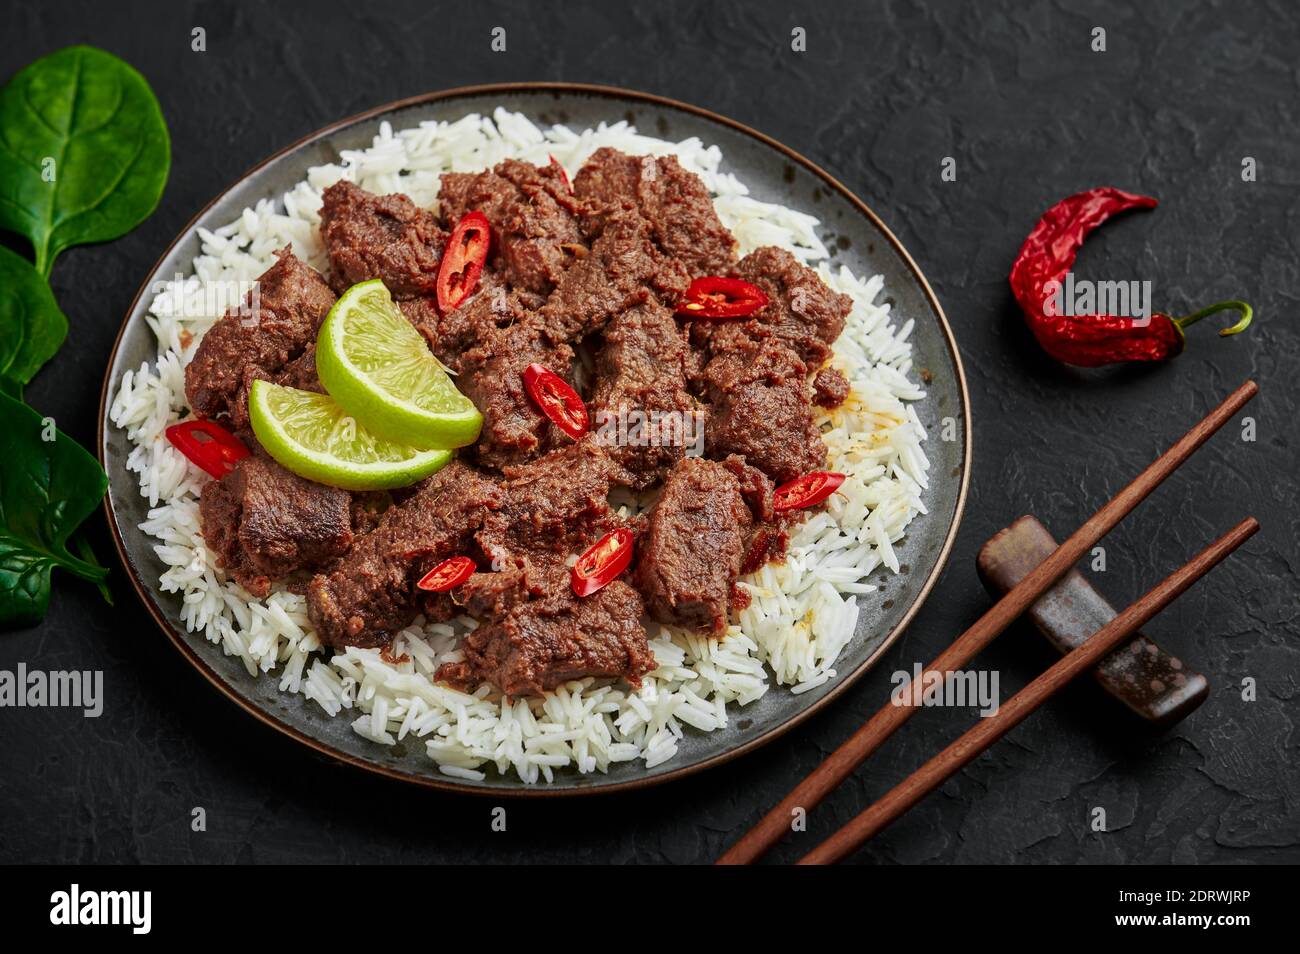 Beef Rendang on black plate at black slate table top. Indonesian padang cuisine meat dish. Asian food. Stock Photo